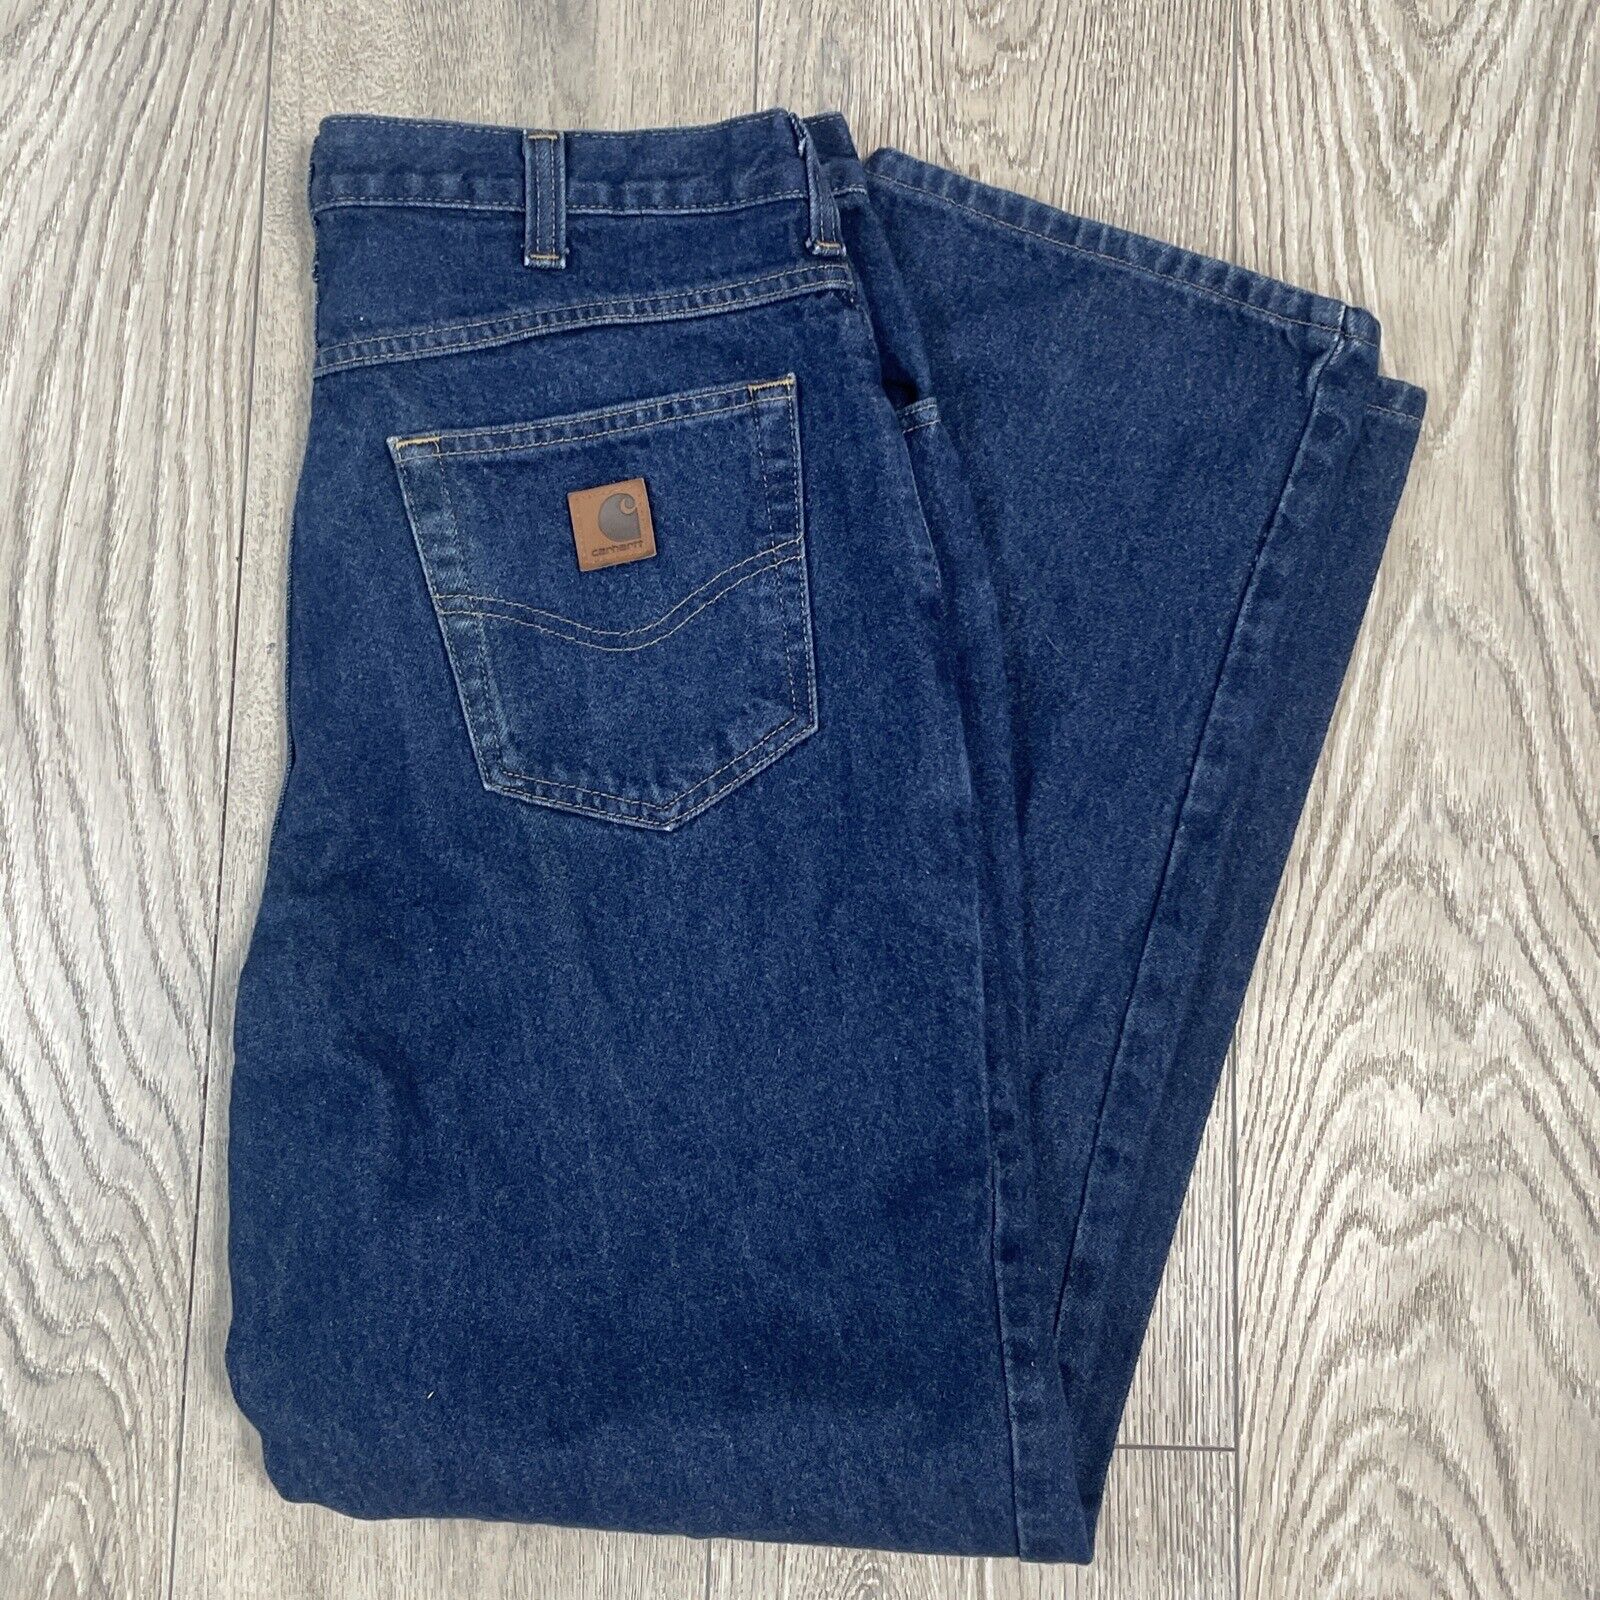 Carhartt 381-83 DENIM RELAXED FIT WORK JEANS 34x30 (tag 34x32)